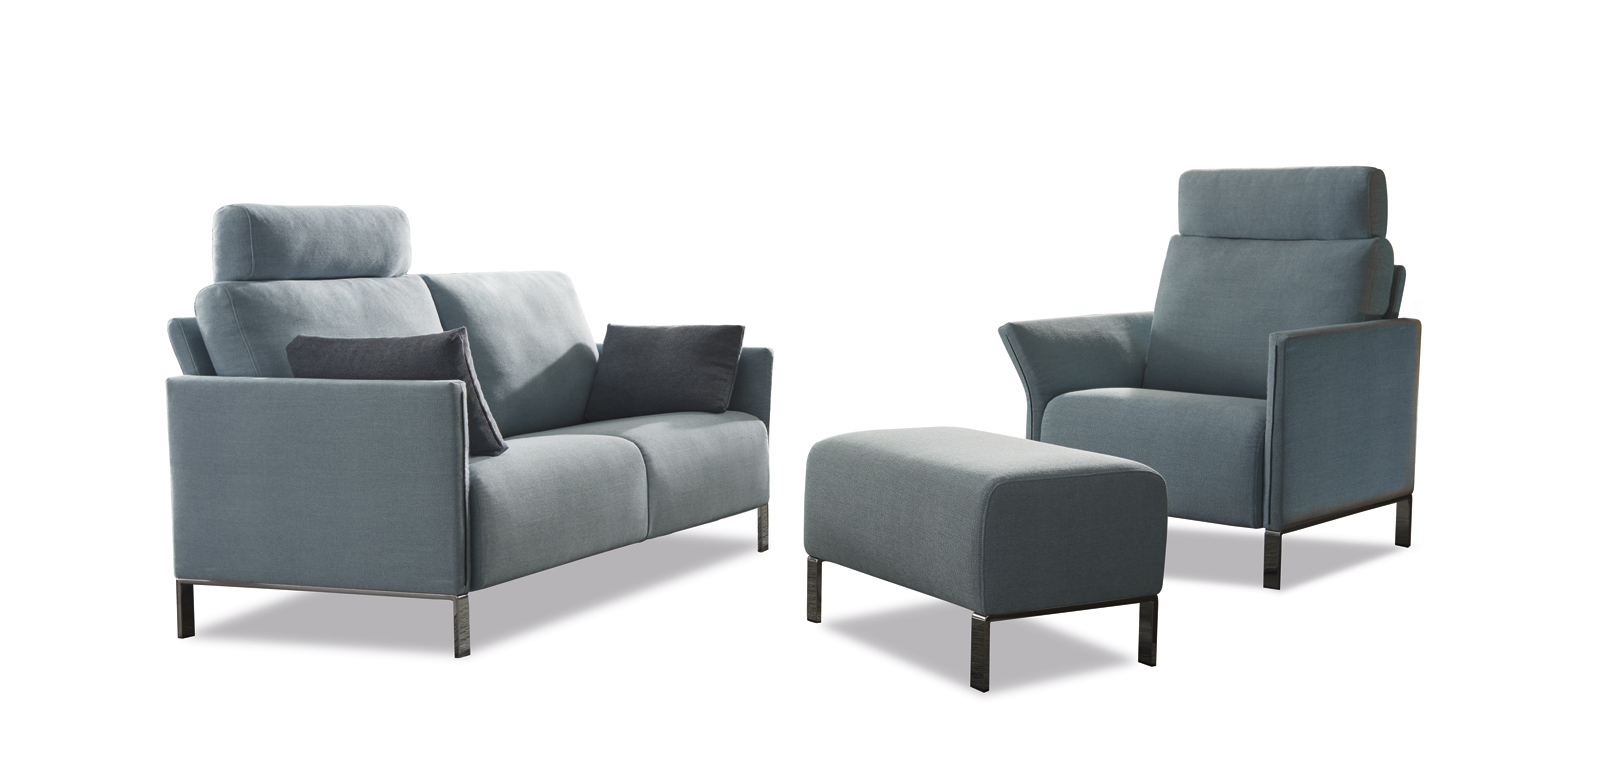 Cool special Scandic look paired with refined and beautiful details gives the noble sofa its special charisma. Whether in fabric or leather, an exclusive sofa like Modena is a real eye-catcher as a 2- or 3-seater with stool or single armchair. The narrow armrests can be angled up to 72° and thus adjusted as required. A contrasting decorative seam on the front of the armrests emphasises the slender silhouette. The sofa is optionally available with a headrest.